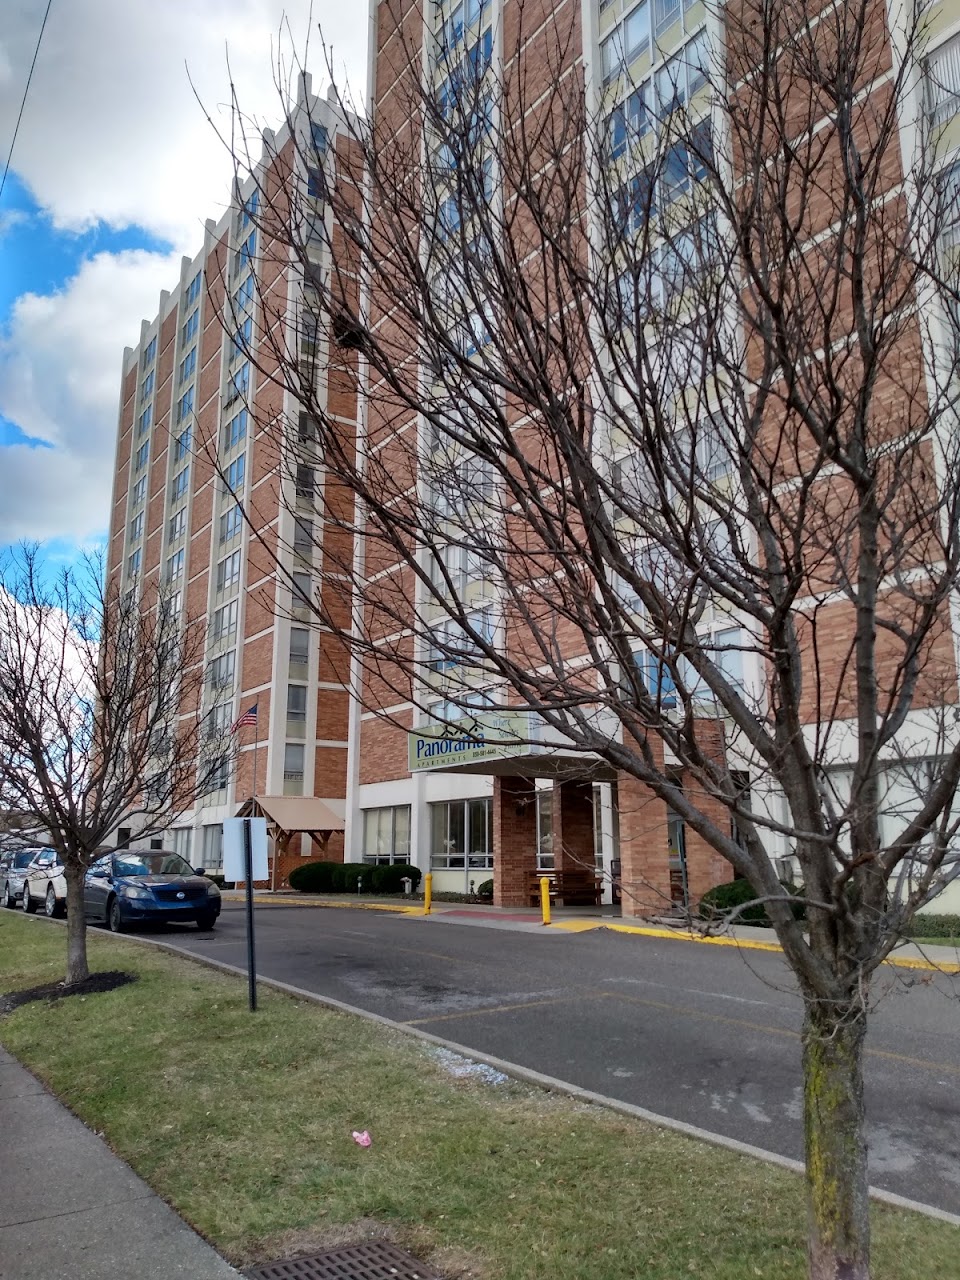 Photo of PANORAMA APARTMENTS EAST. Affordable housing located at BRENT SPENCE SQUARE COVINGTON, KY 41011